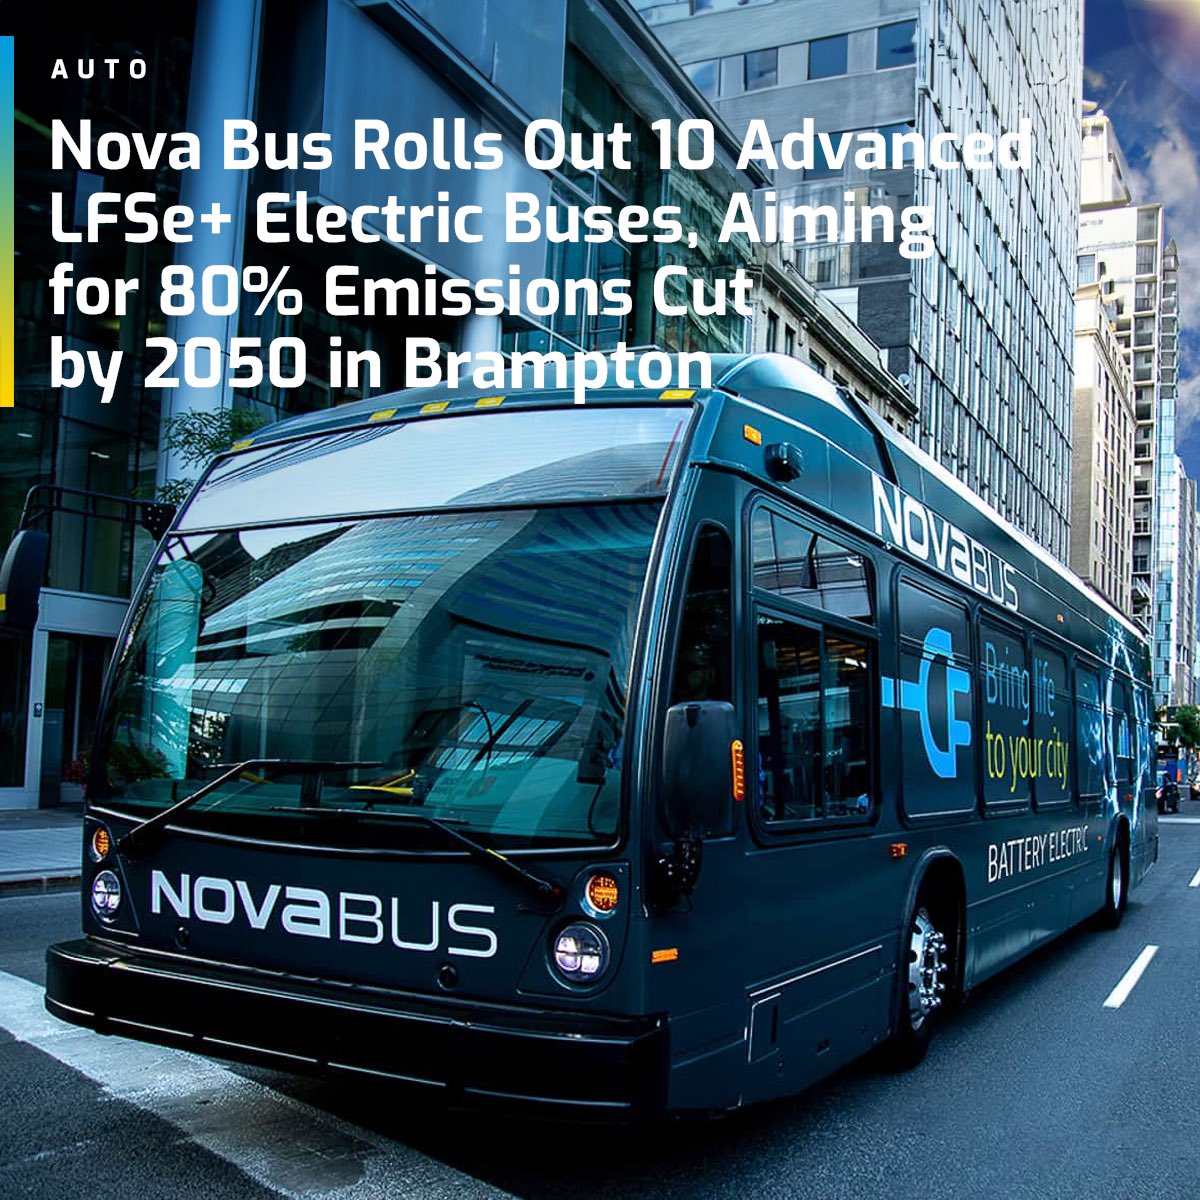 Nova Bus, a leading North American transit bus manufacturer and member of the Volvo Group, has announced a partnership with Brampton, Ontario, Canada. 🤝⚡️

Find out more: electrifynews.com/news/auto/nova…

#ElectrifyNews #EV #ElectricVehicle #ElectricBus #EVBus